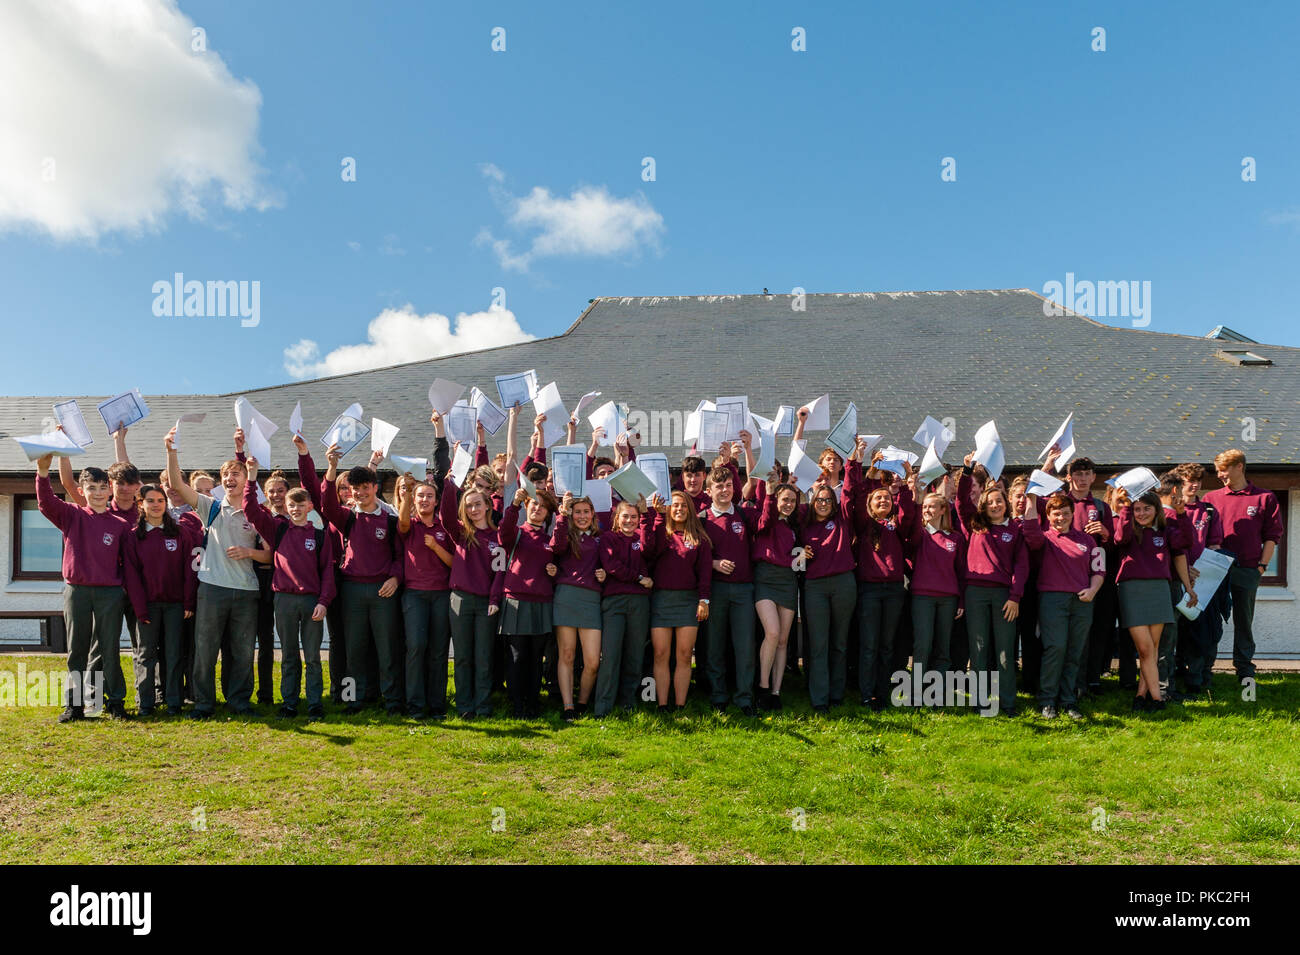 Schull, West Cork, Ireland. 12th Sept, 2018.  Over 62,500 students received their Junior Cert results today. Schull College Junior Cert students celebrate receiving their results. Credit: Andy Gibson/Alamy Live News. Stock Photo